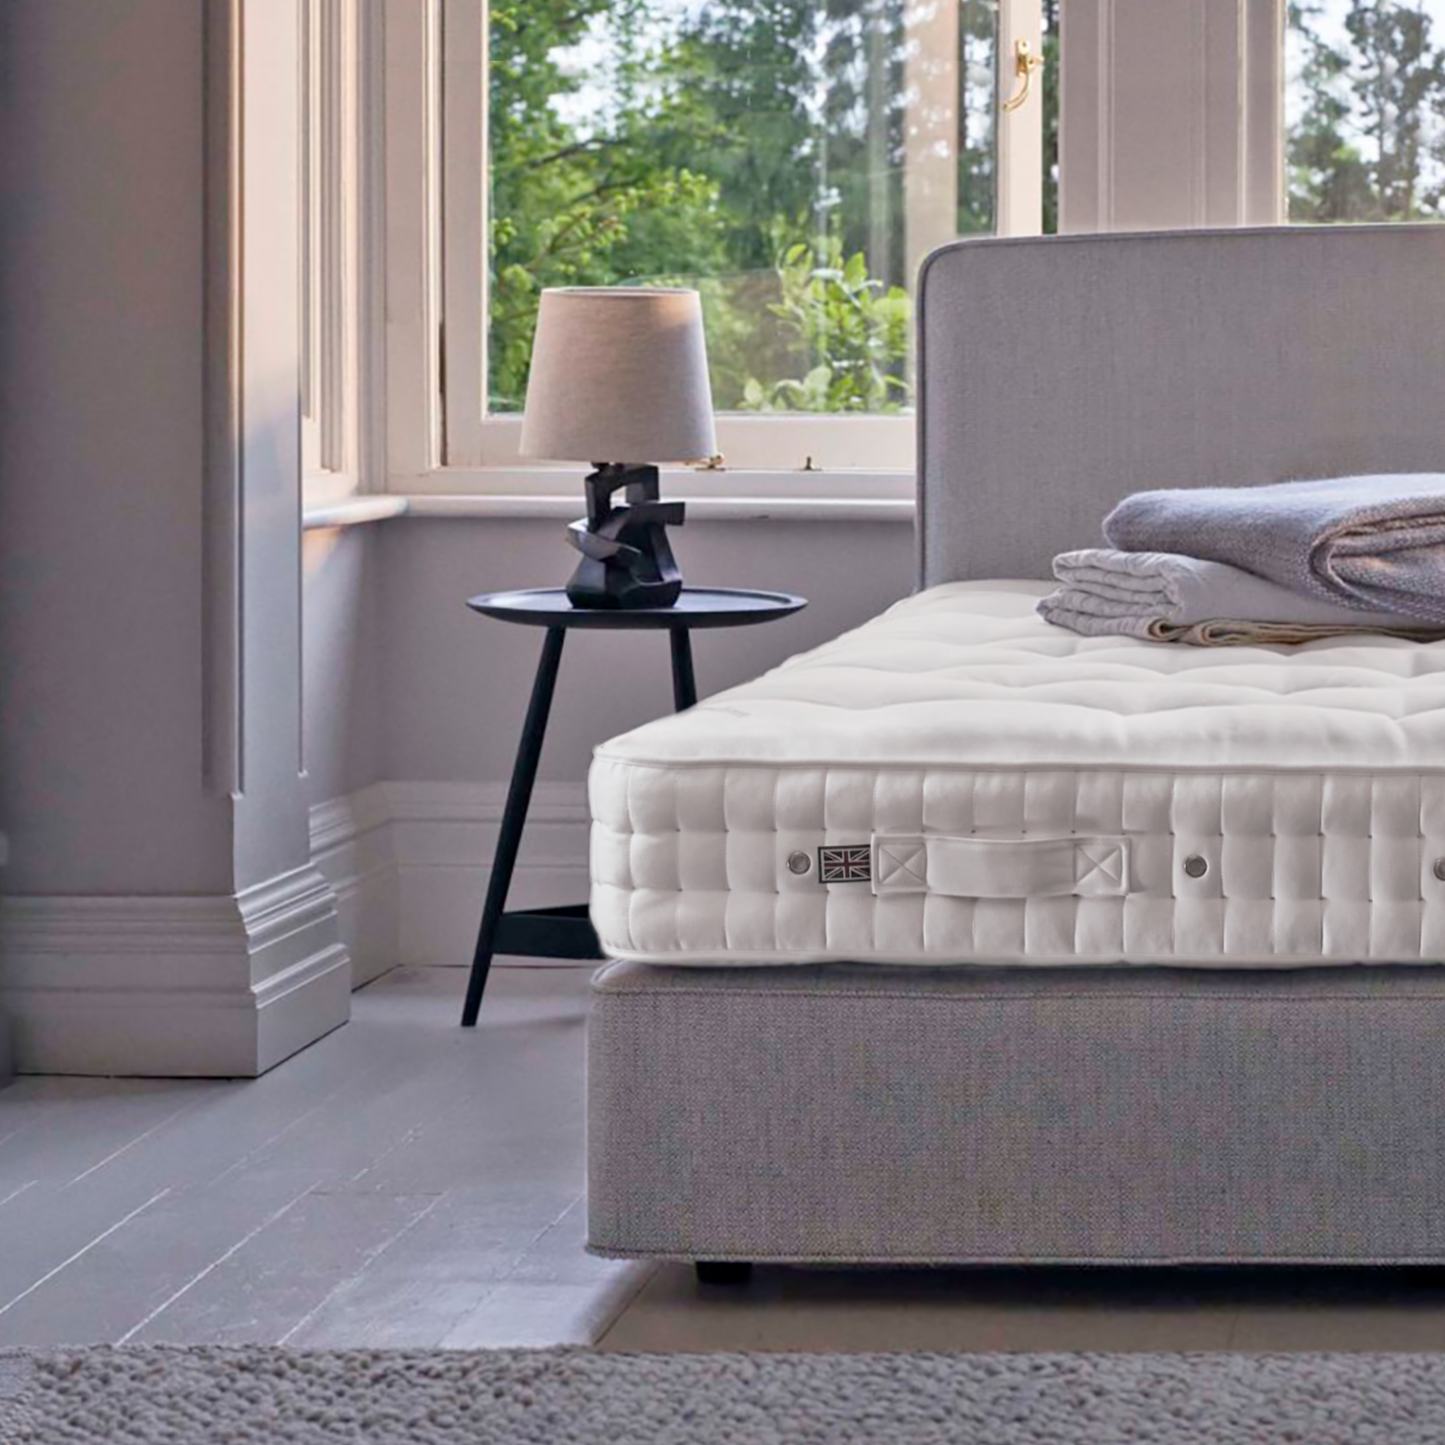 Vispring Coronet Mattress The Coronet's hand-teased British fleece wool and cotton in the topmost layer create a medium-soft resilient comfort layer that beautifully compliments the high coil count single-layer configuration of this exceptionally comfortable entry mattress (2,058 coils / king).